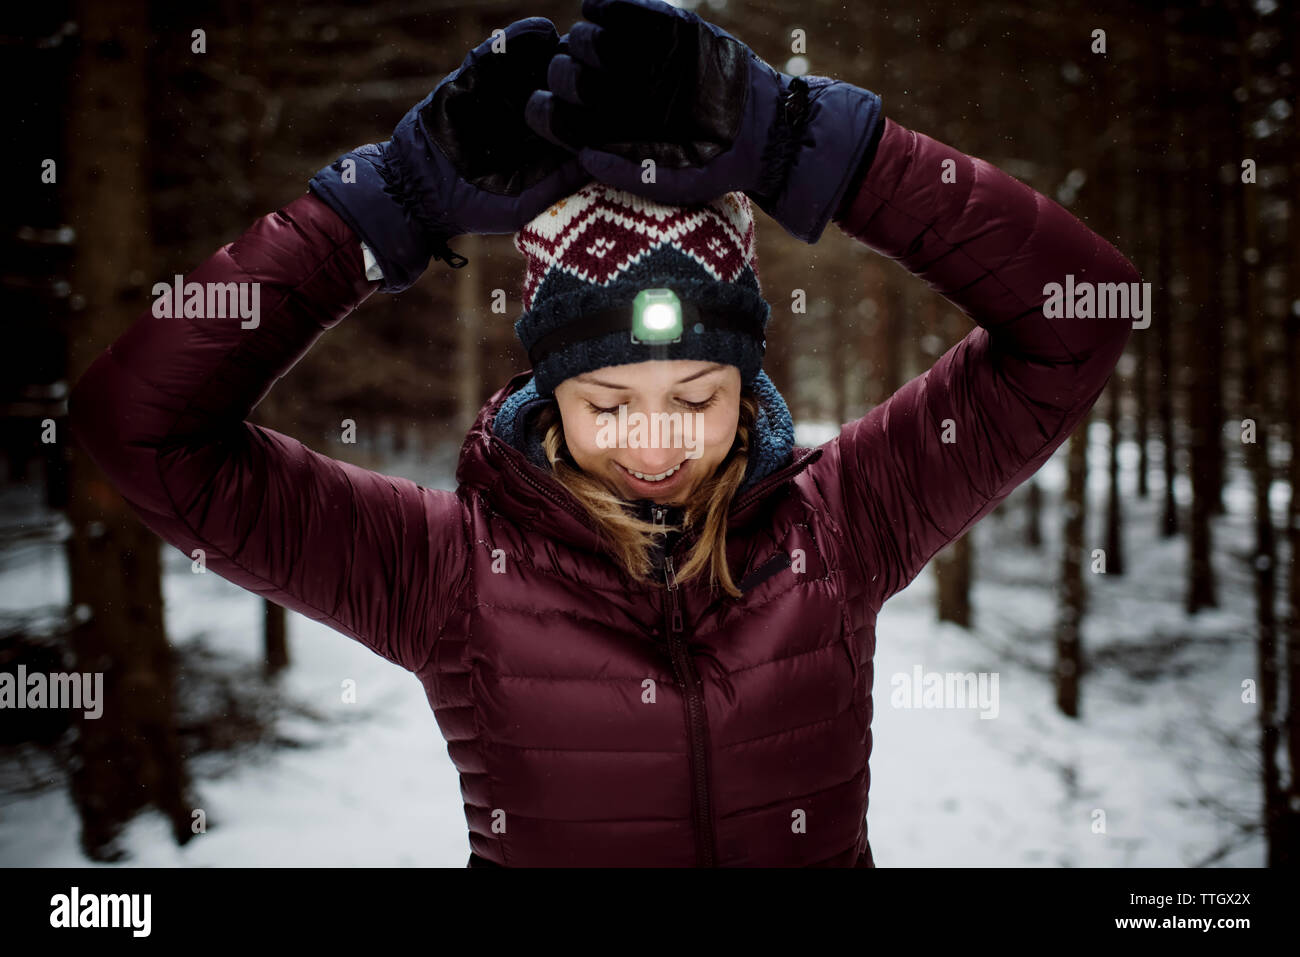 woman smiling happy with head torch on outdoors in the snowy forest Stock Photo